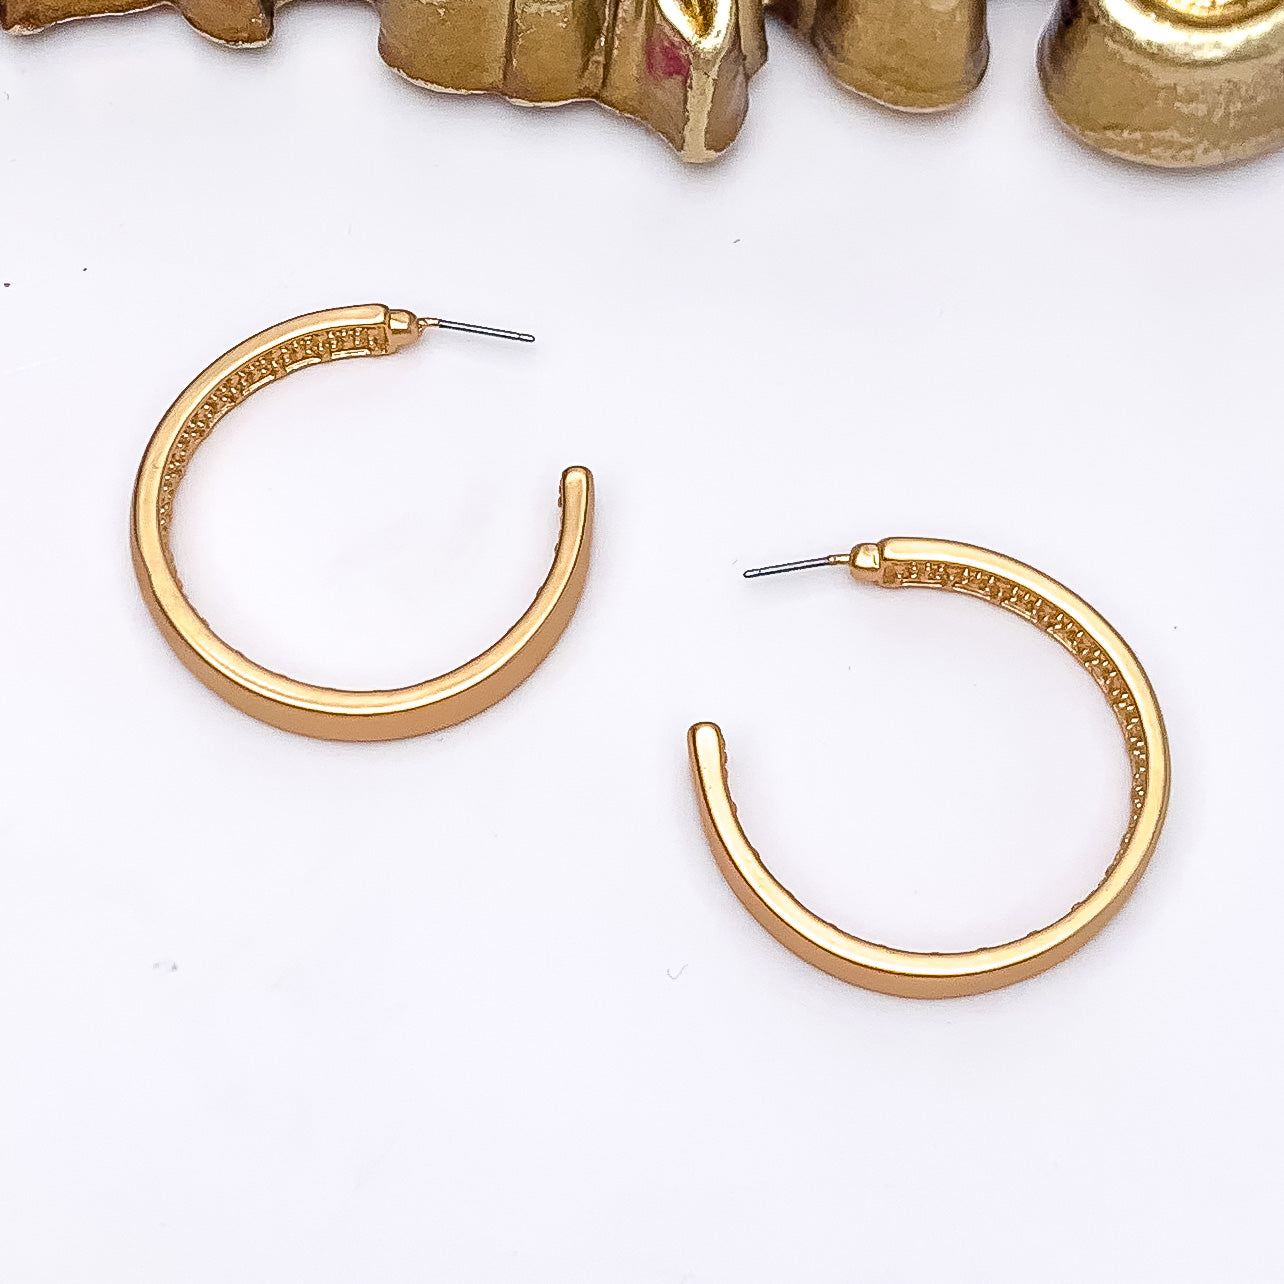 Gold Tone Large Hoop Earrings With a Textured Inside - Giddy Up Glamour Boutique